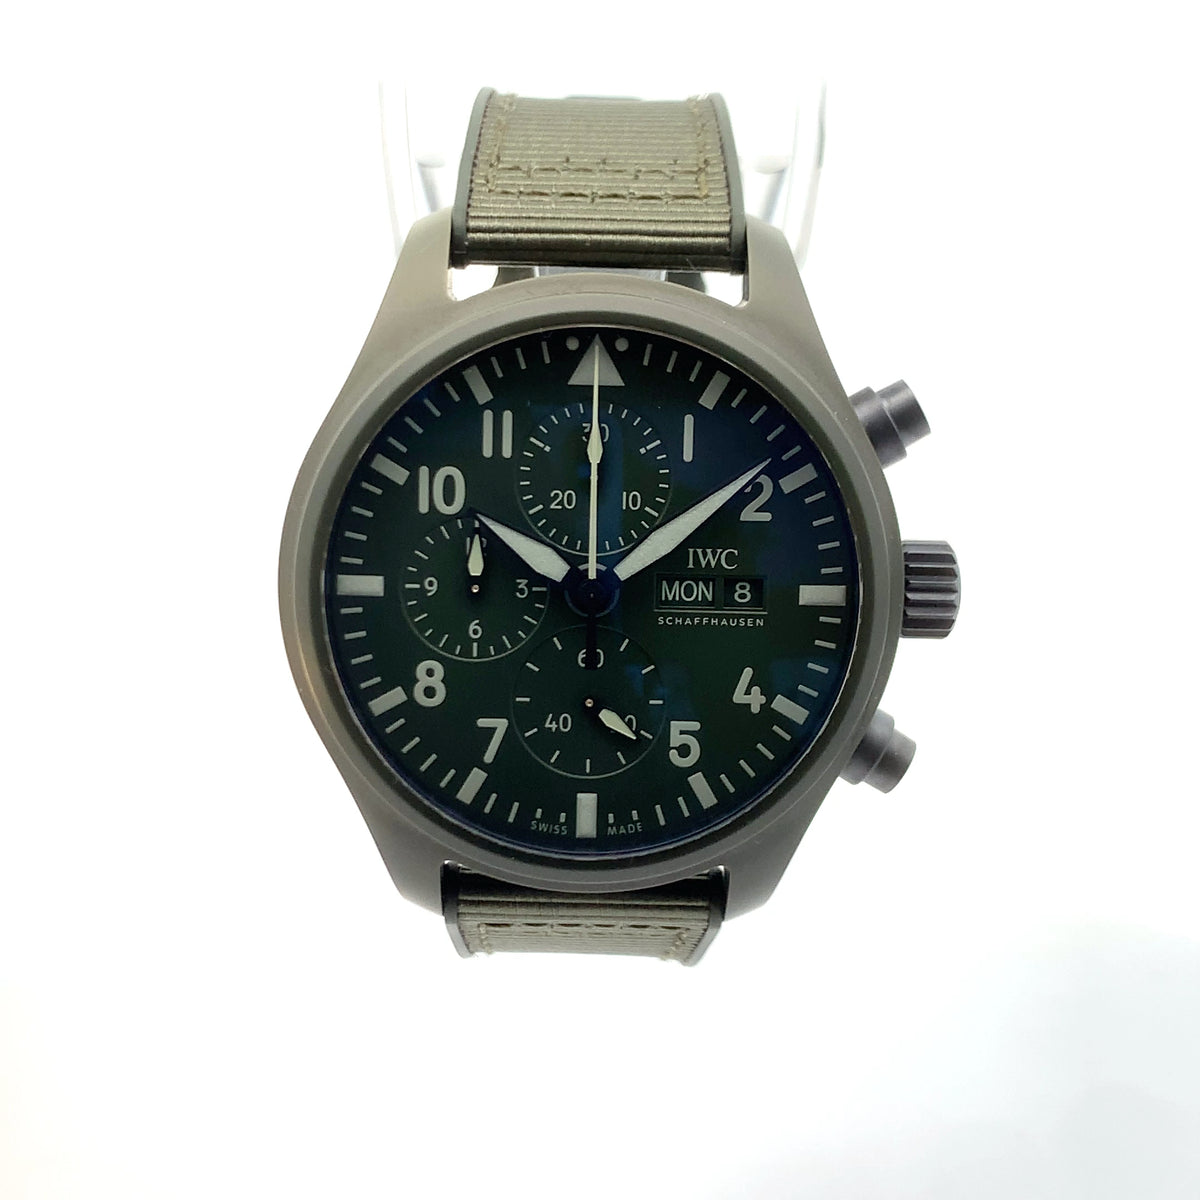 PRE-OWNED IWC PILOT CHRONOGRAPH TOP GUN "WOODLAND" IW389106